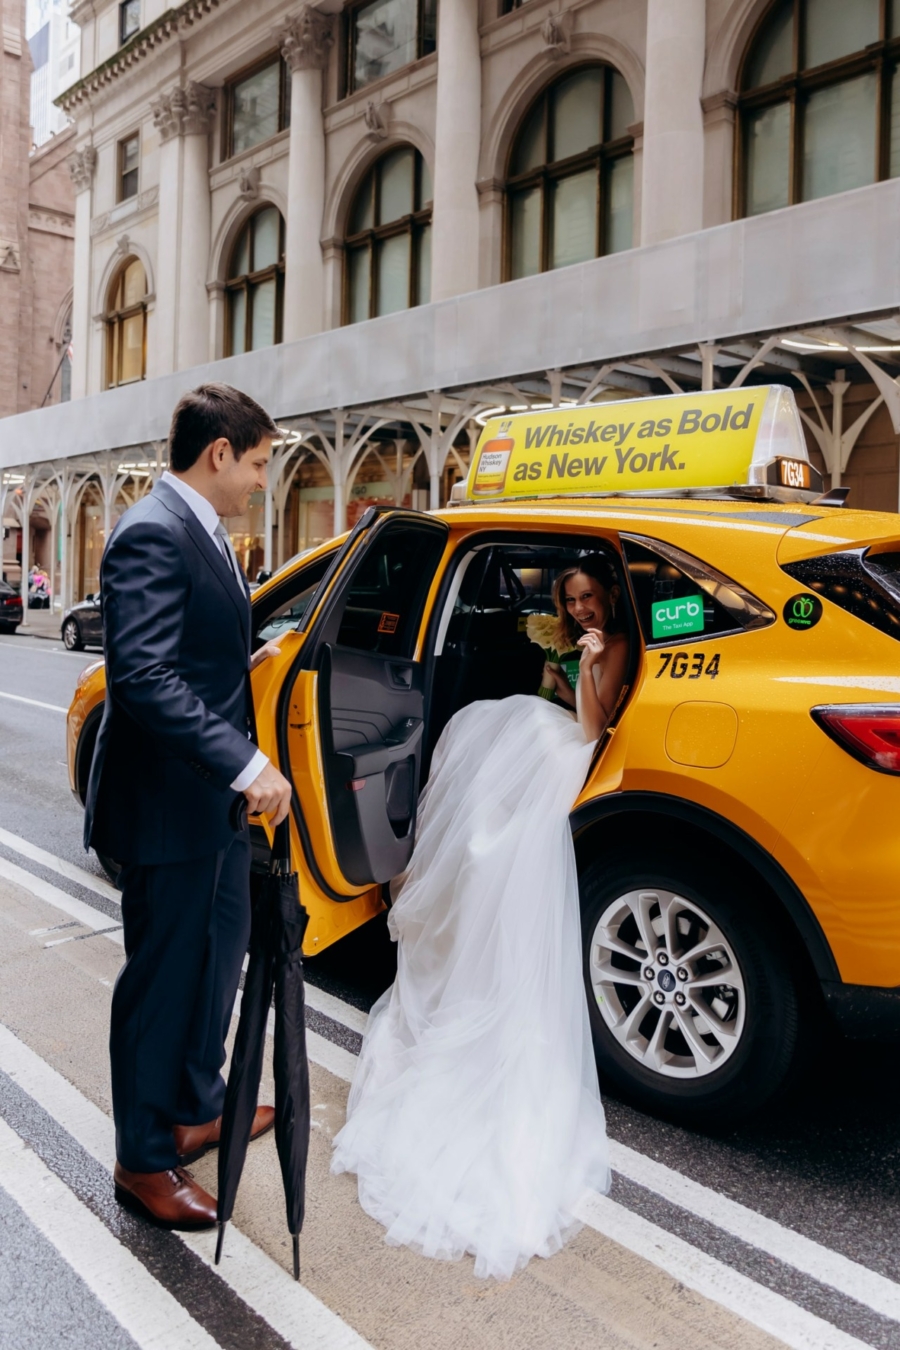 Wedding photo in a yellow cab in NYC